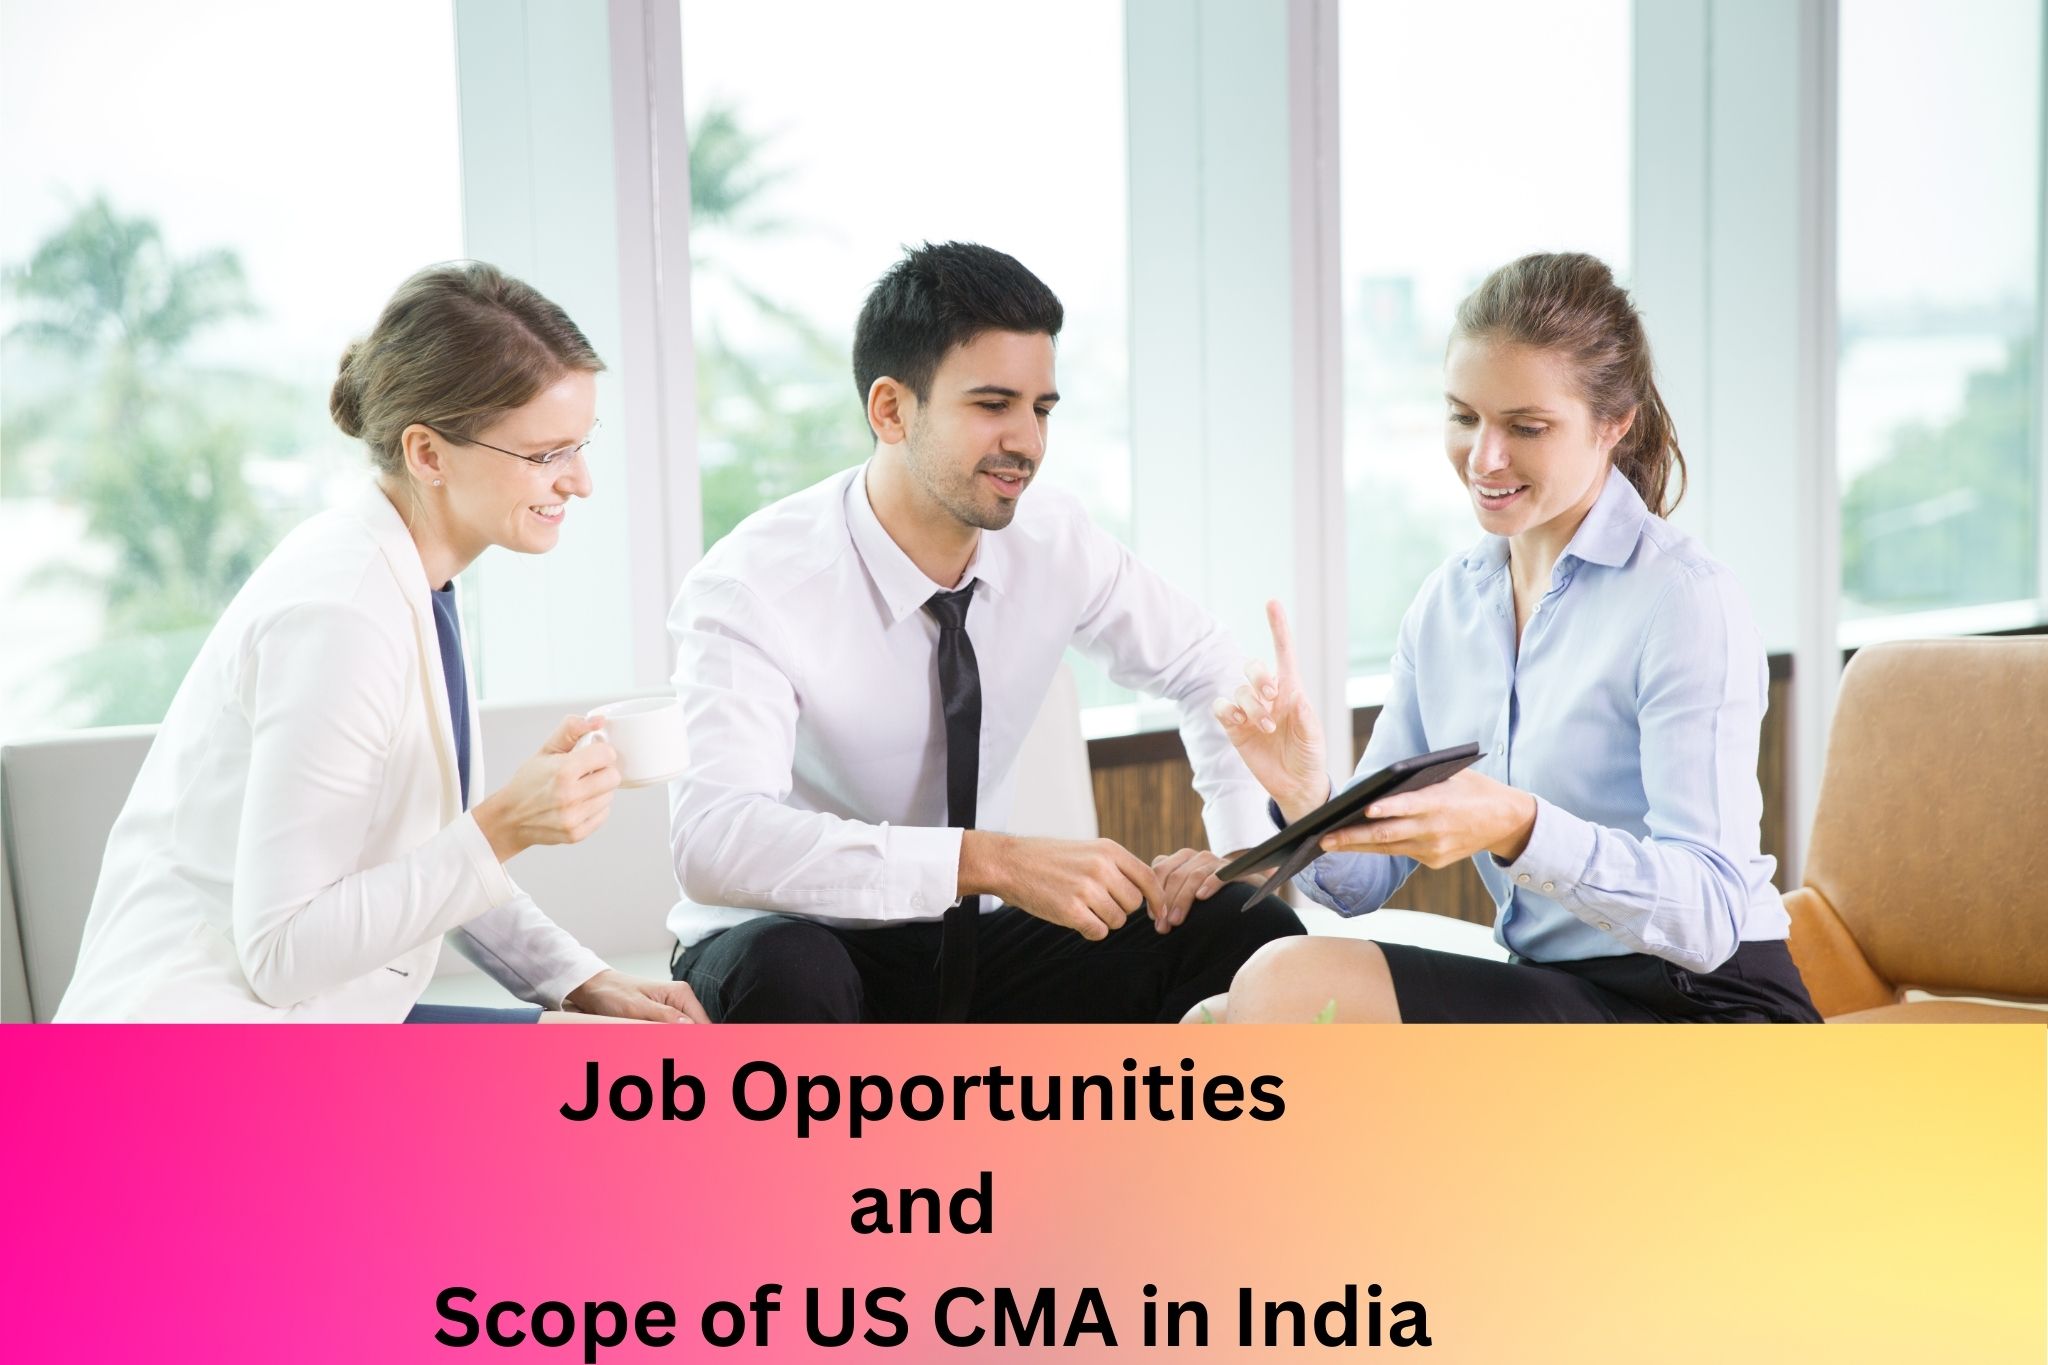 Job Opportunities and Scope of US CMA in India